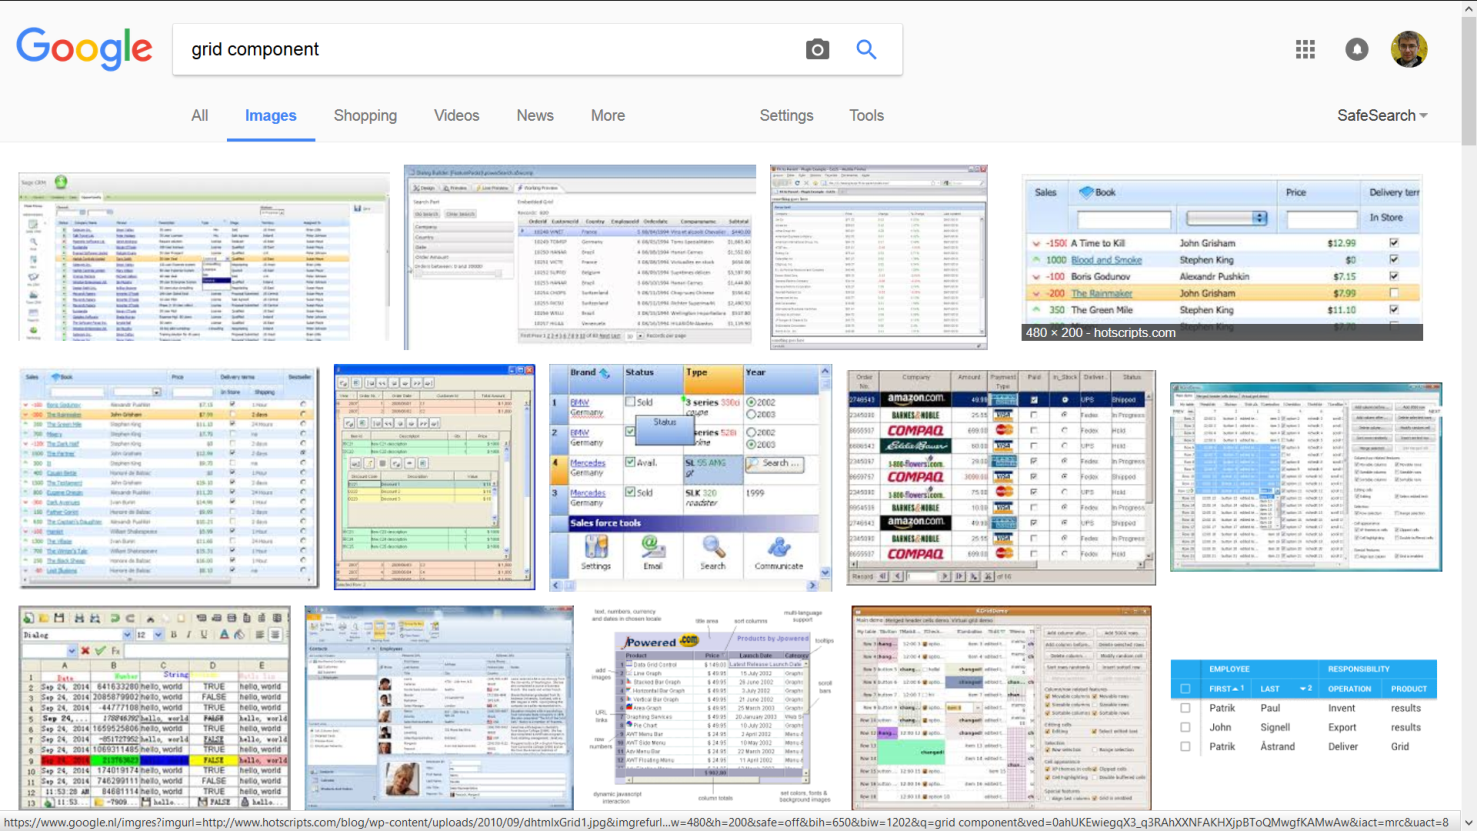 The result of the Google image search by 'grid component' keyword